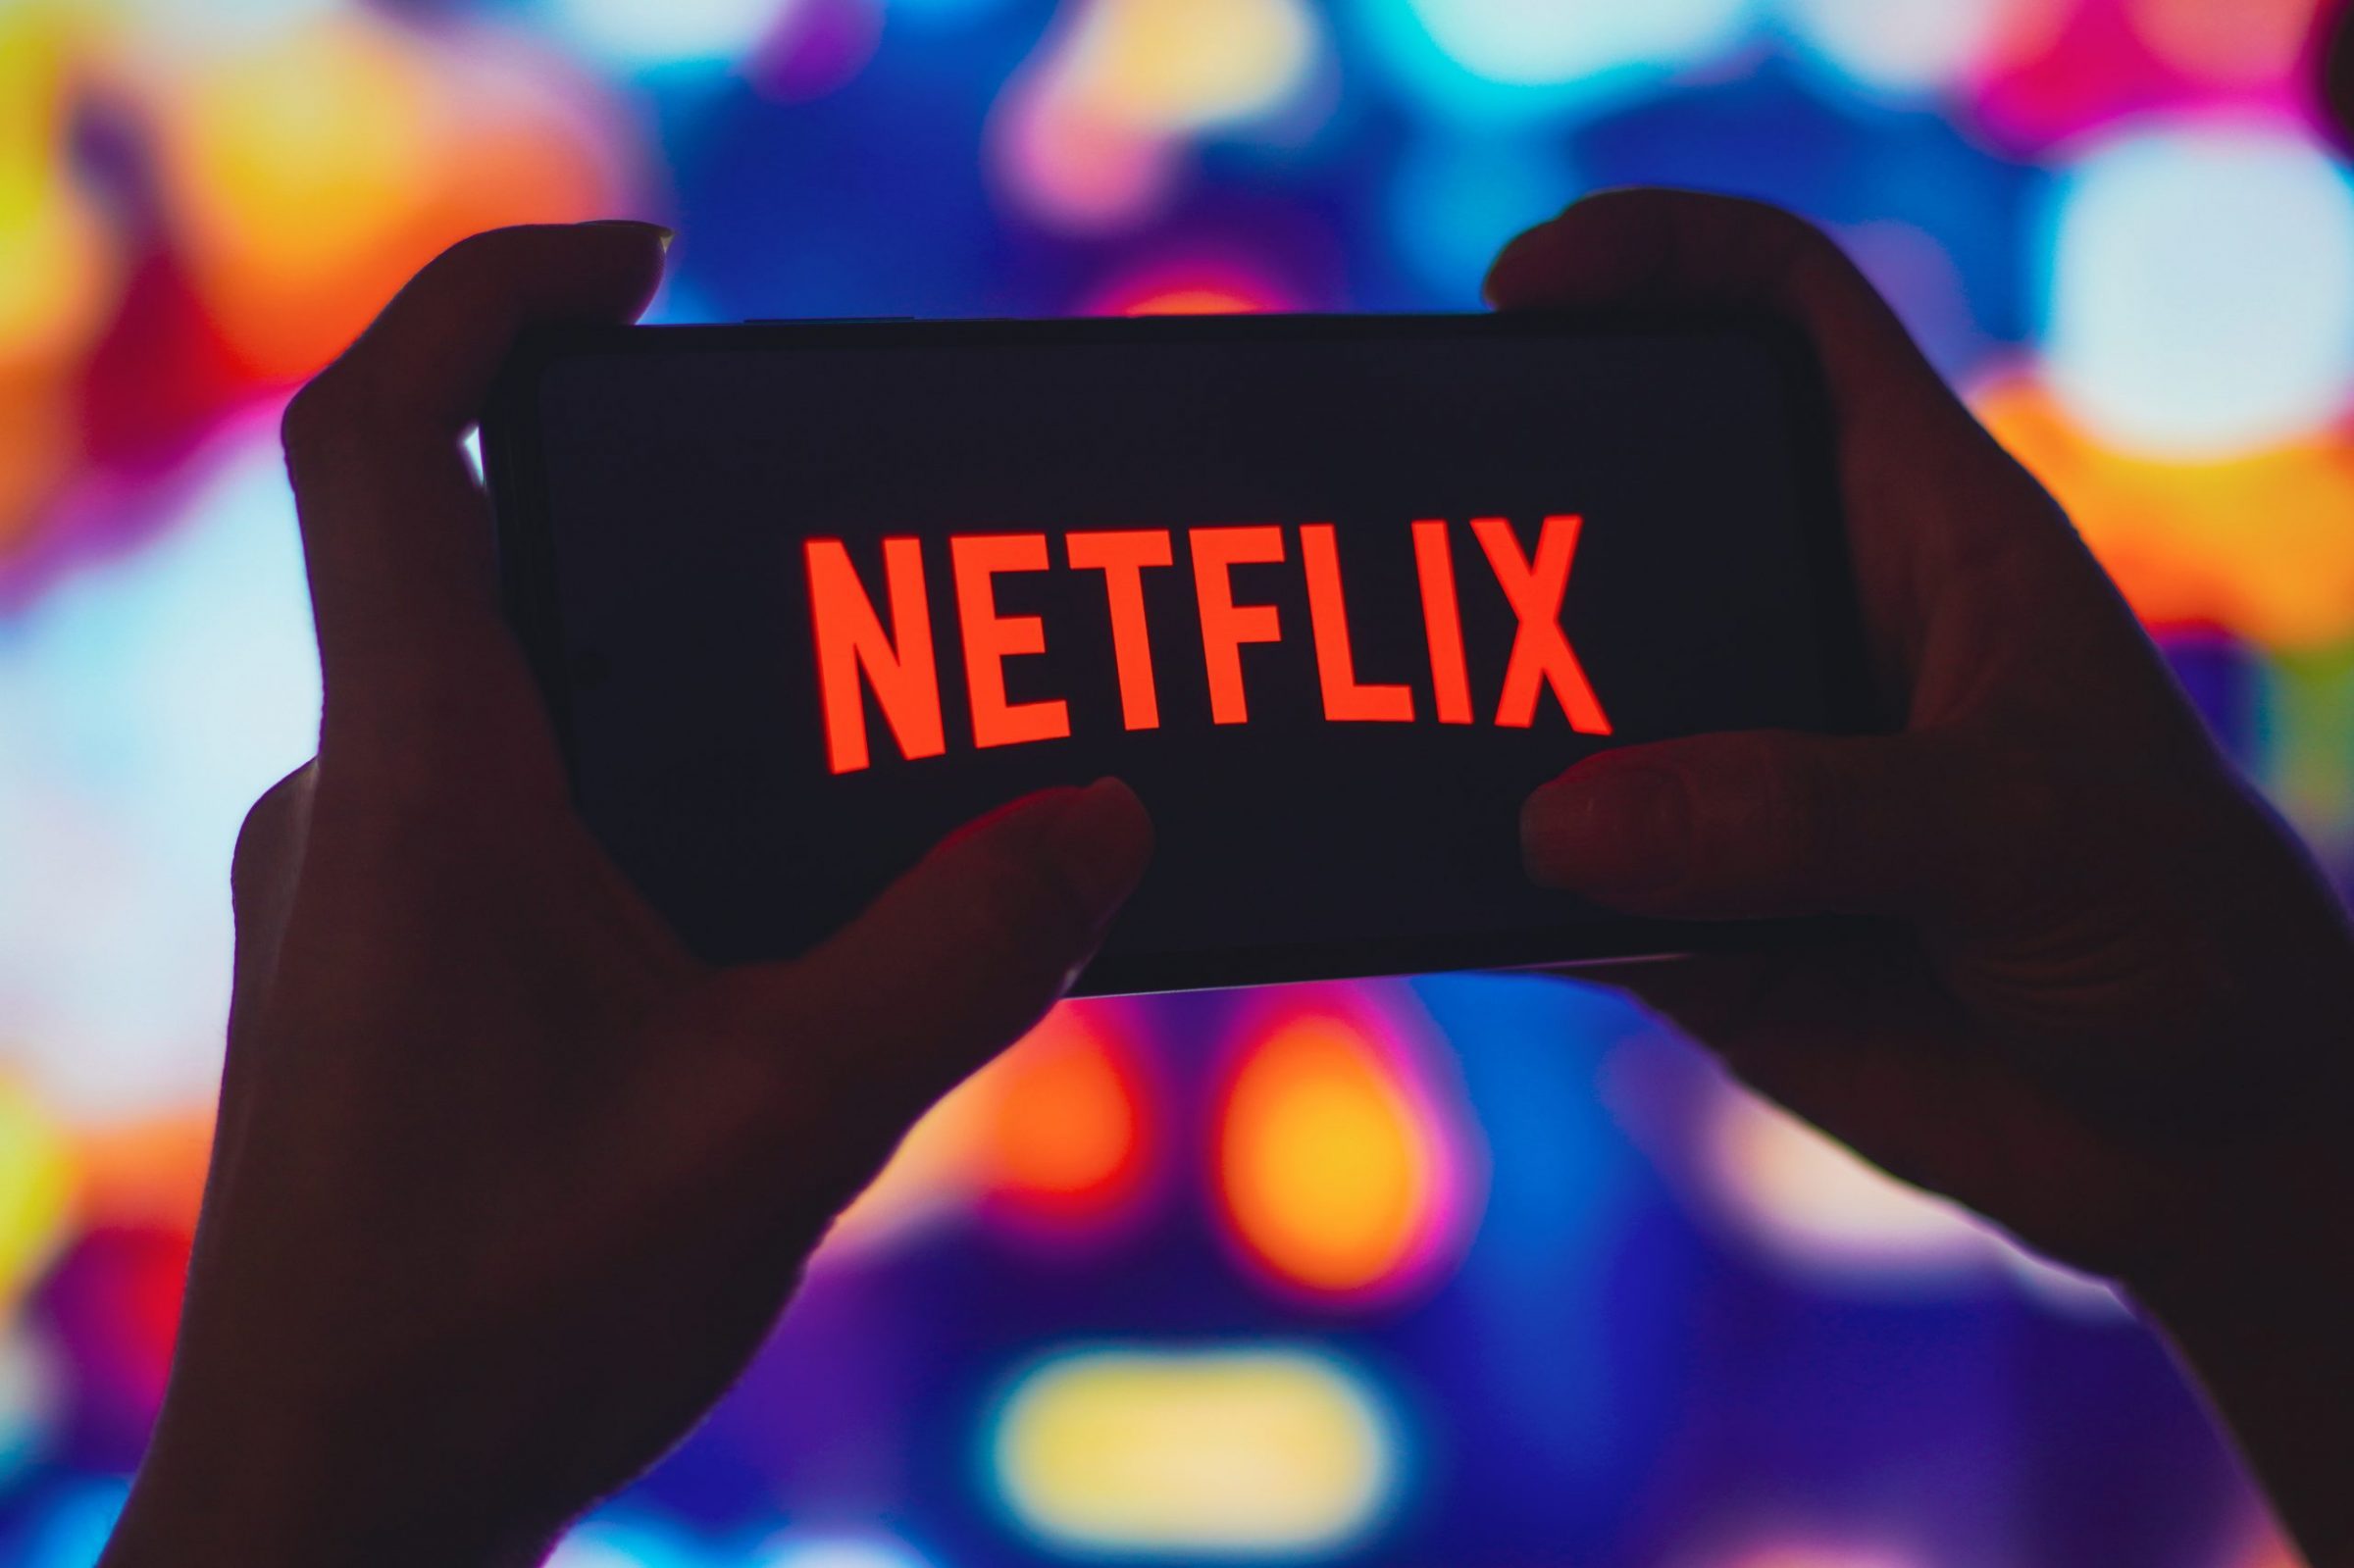 Netflix is adding interactive games to its service by year end